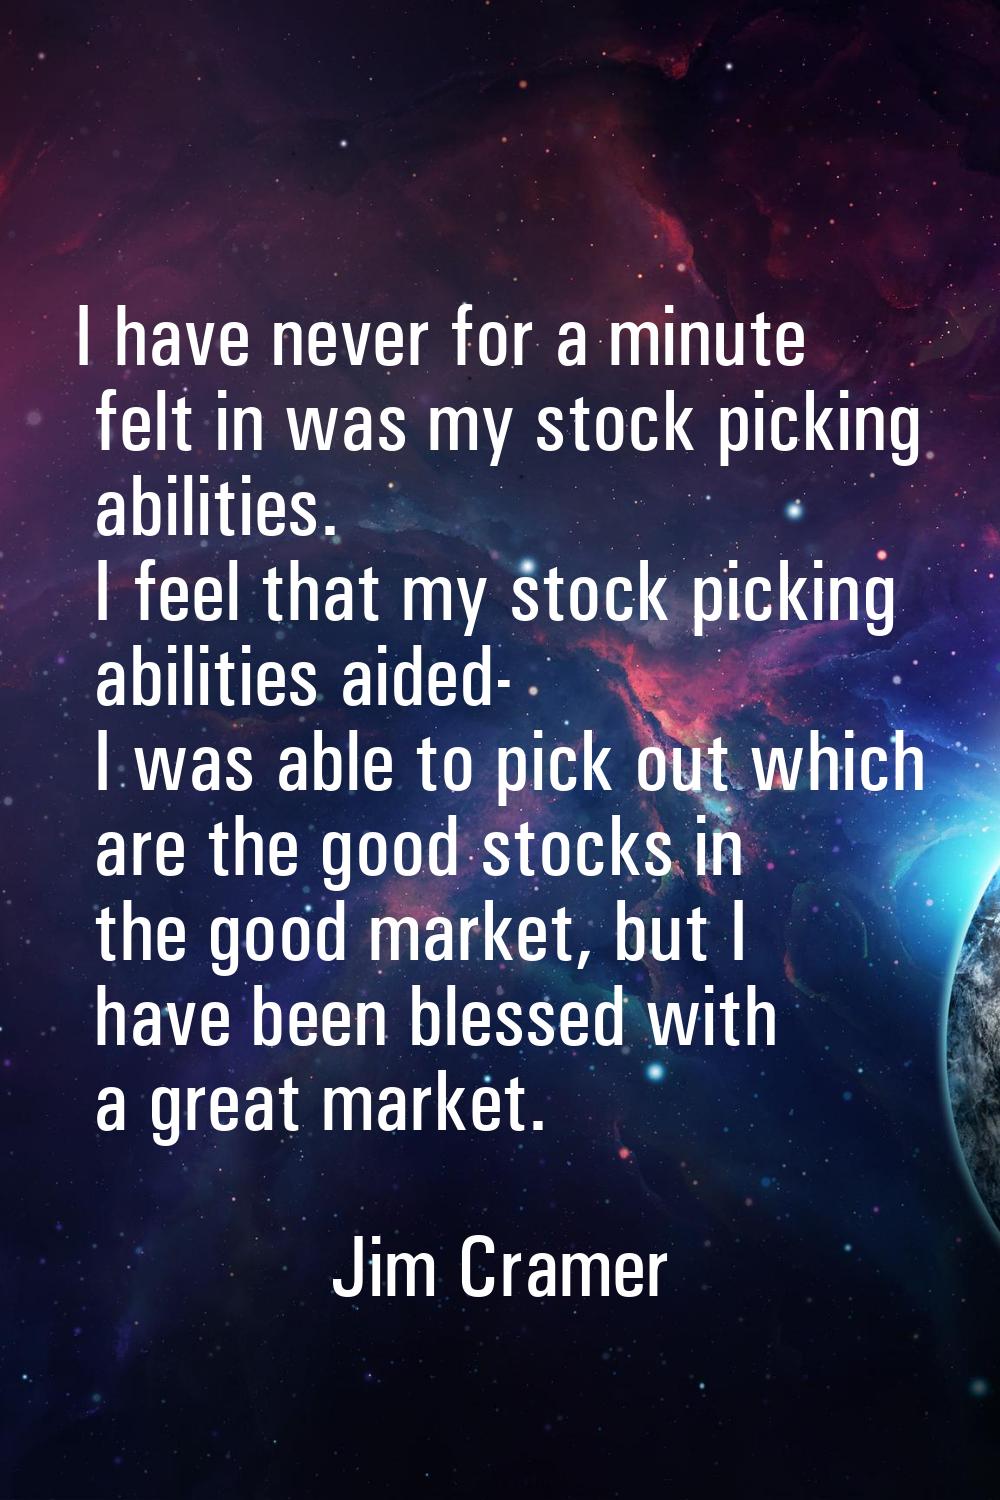 I have never for a minute felt in was my stock picking abilities. I feel that my stock picking abil